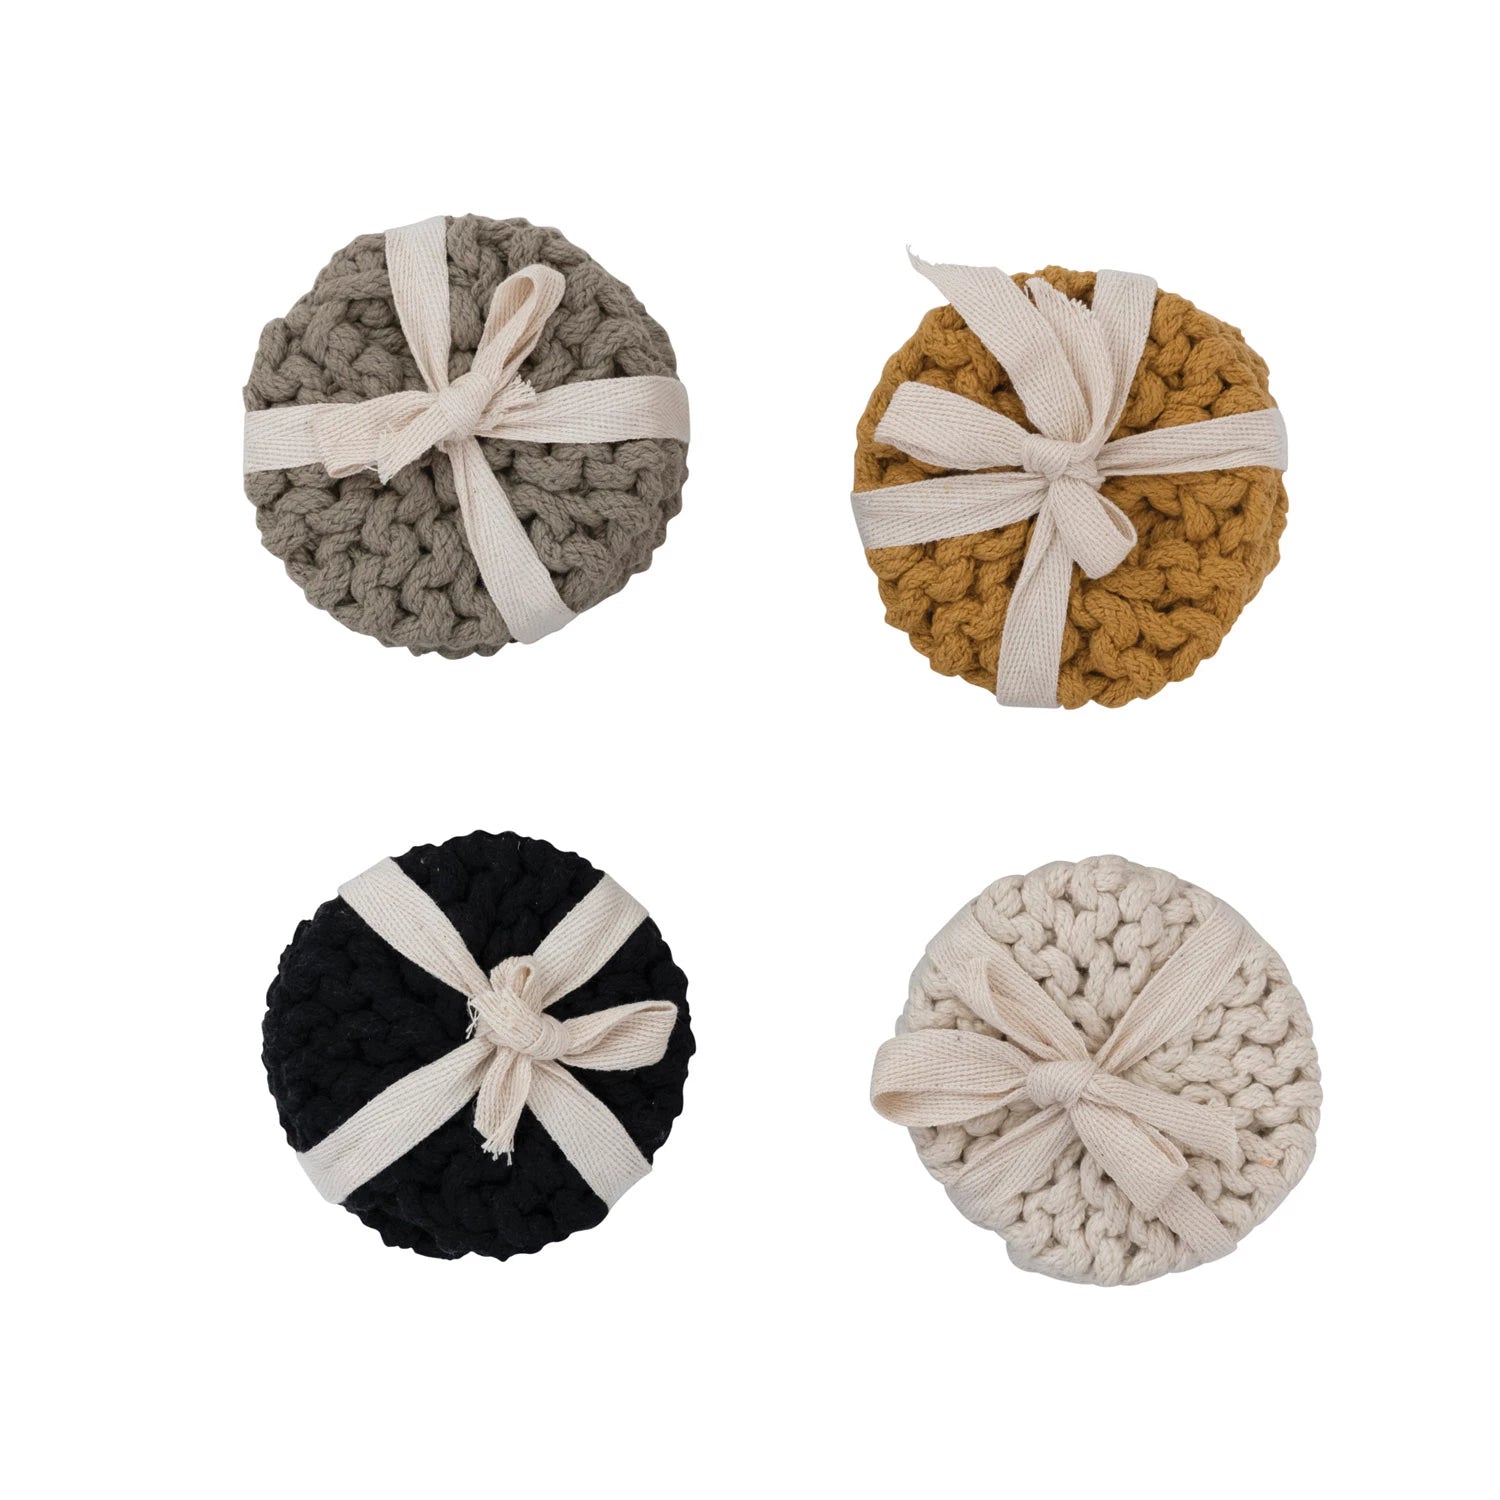 Crocheted Coasters, The Feathered Farmhouse